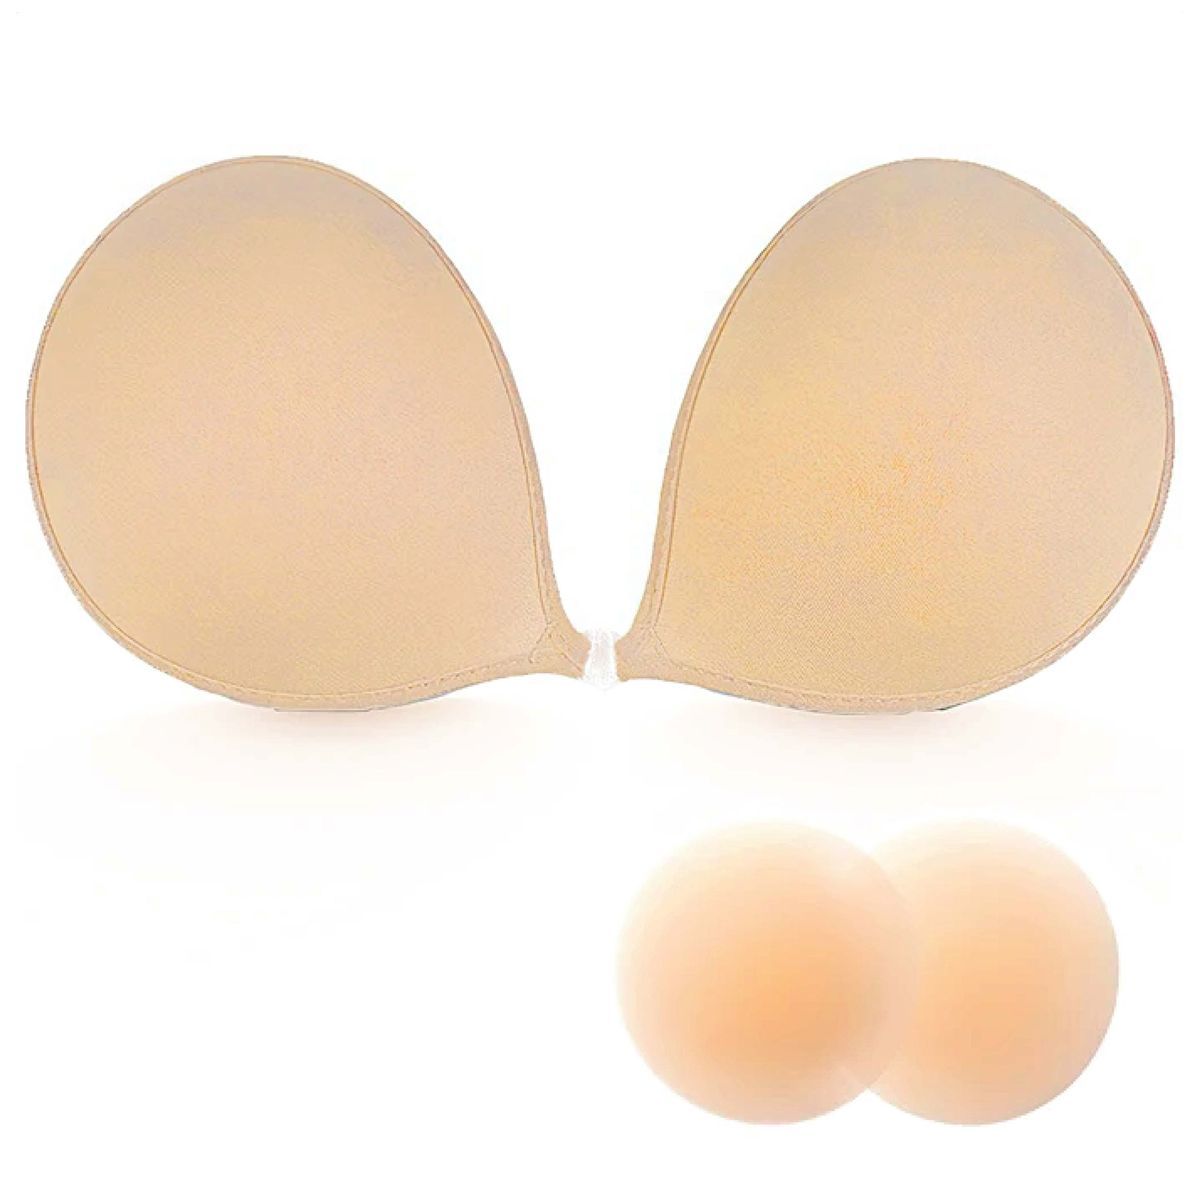 Risque Adhesive Bra, Includes 1 Free Pair of Reusable Nipple Covers, 1ct | Target